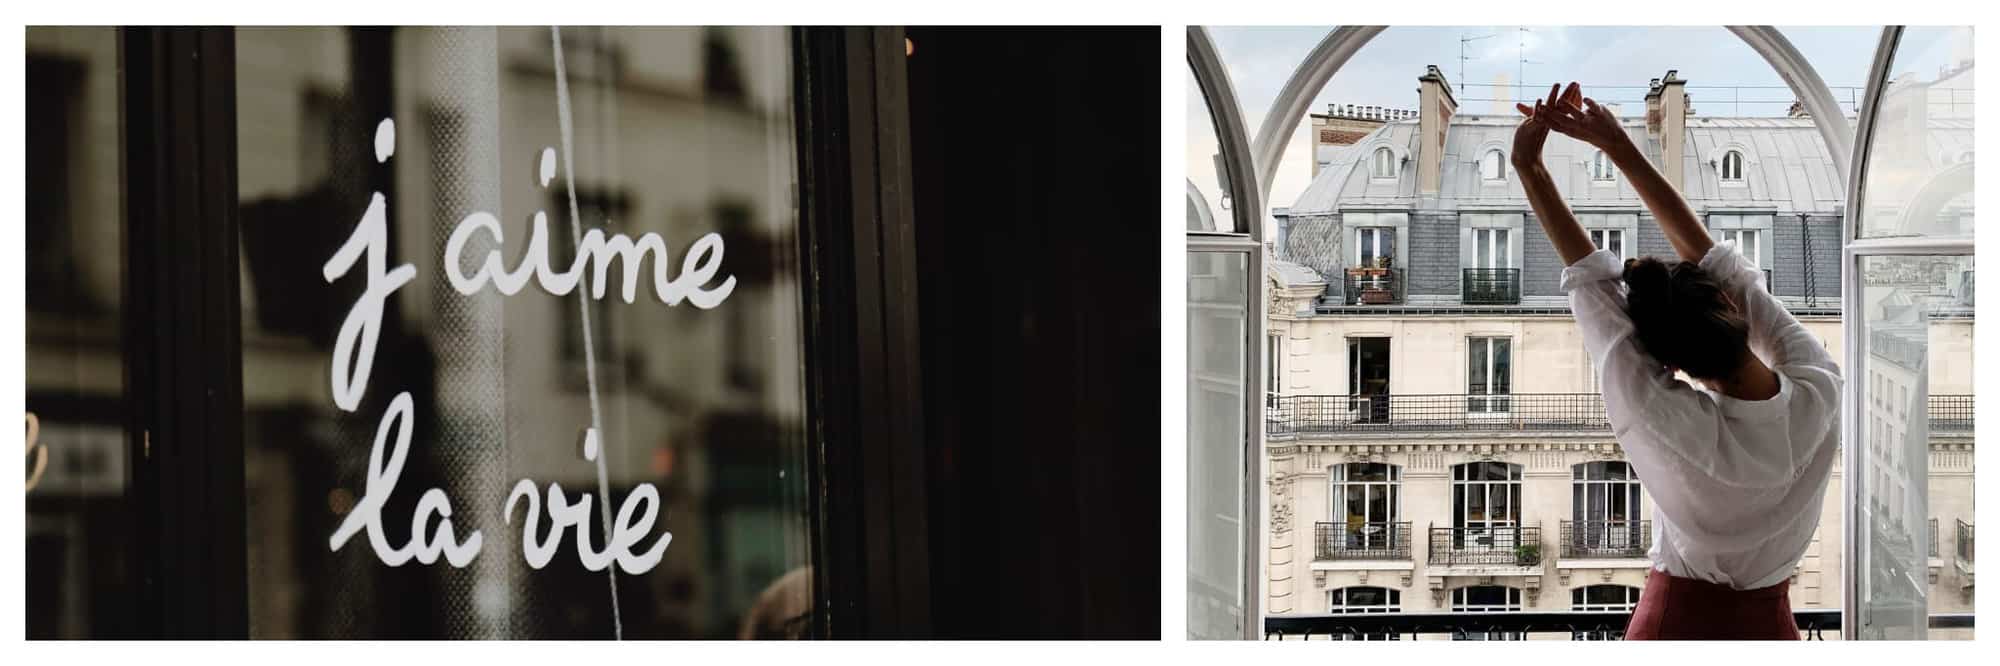 Left: The words “J’aime la vie” (I love life) are written on a window. Right: A woman stands with her back facing the camera, stretching her arms up and to the left. She’s standing in front of a window that is opened and shows typical Parisian buildings. 